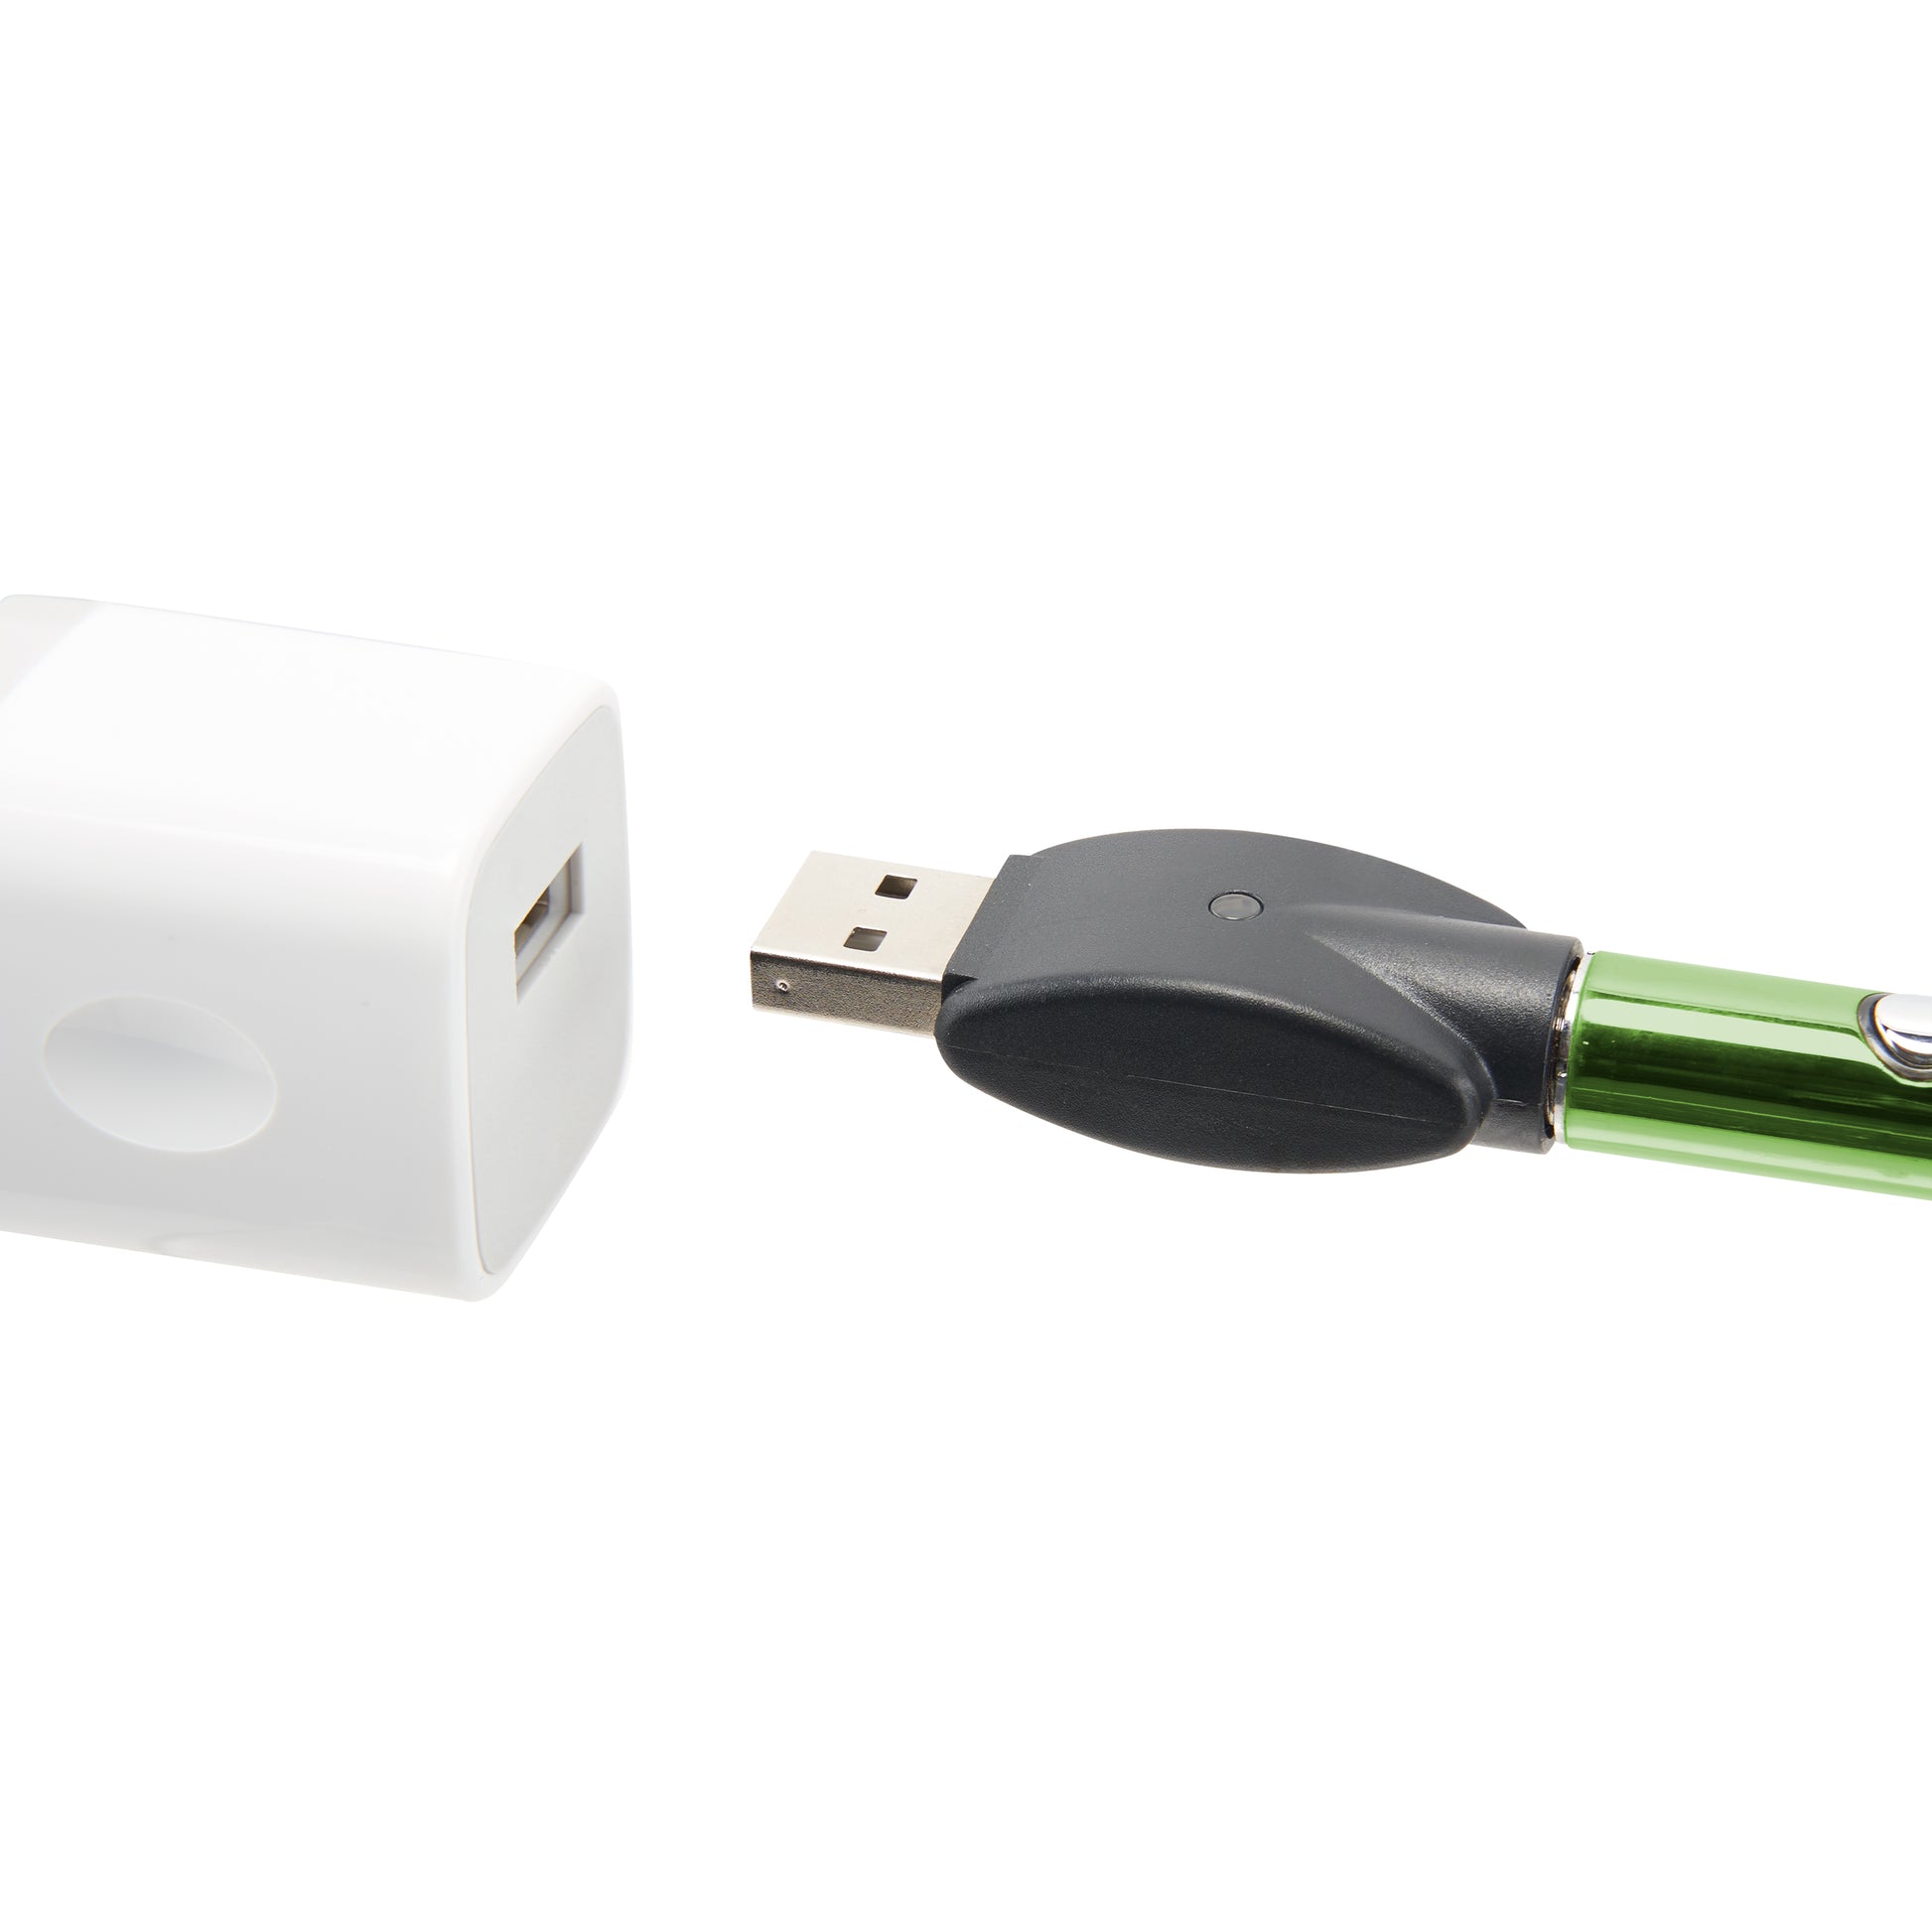 The green Ooze Wink flashlight vape is plugged into its 510 charger, being plugged into a white USB wall adapter